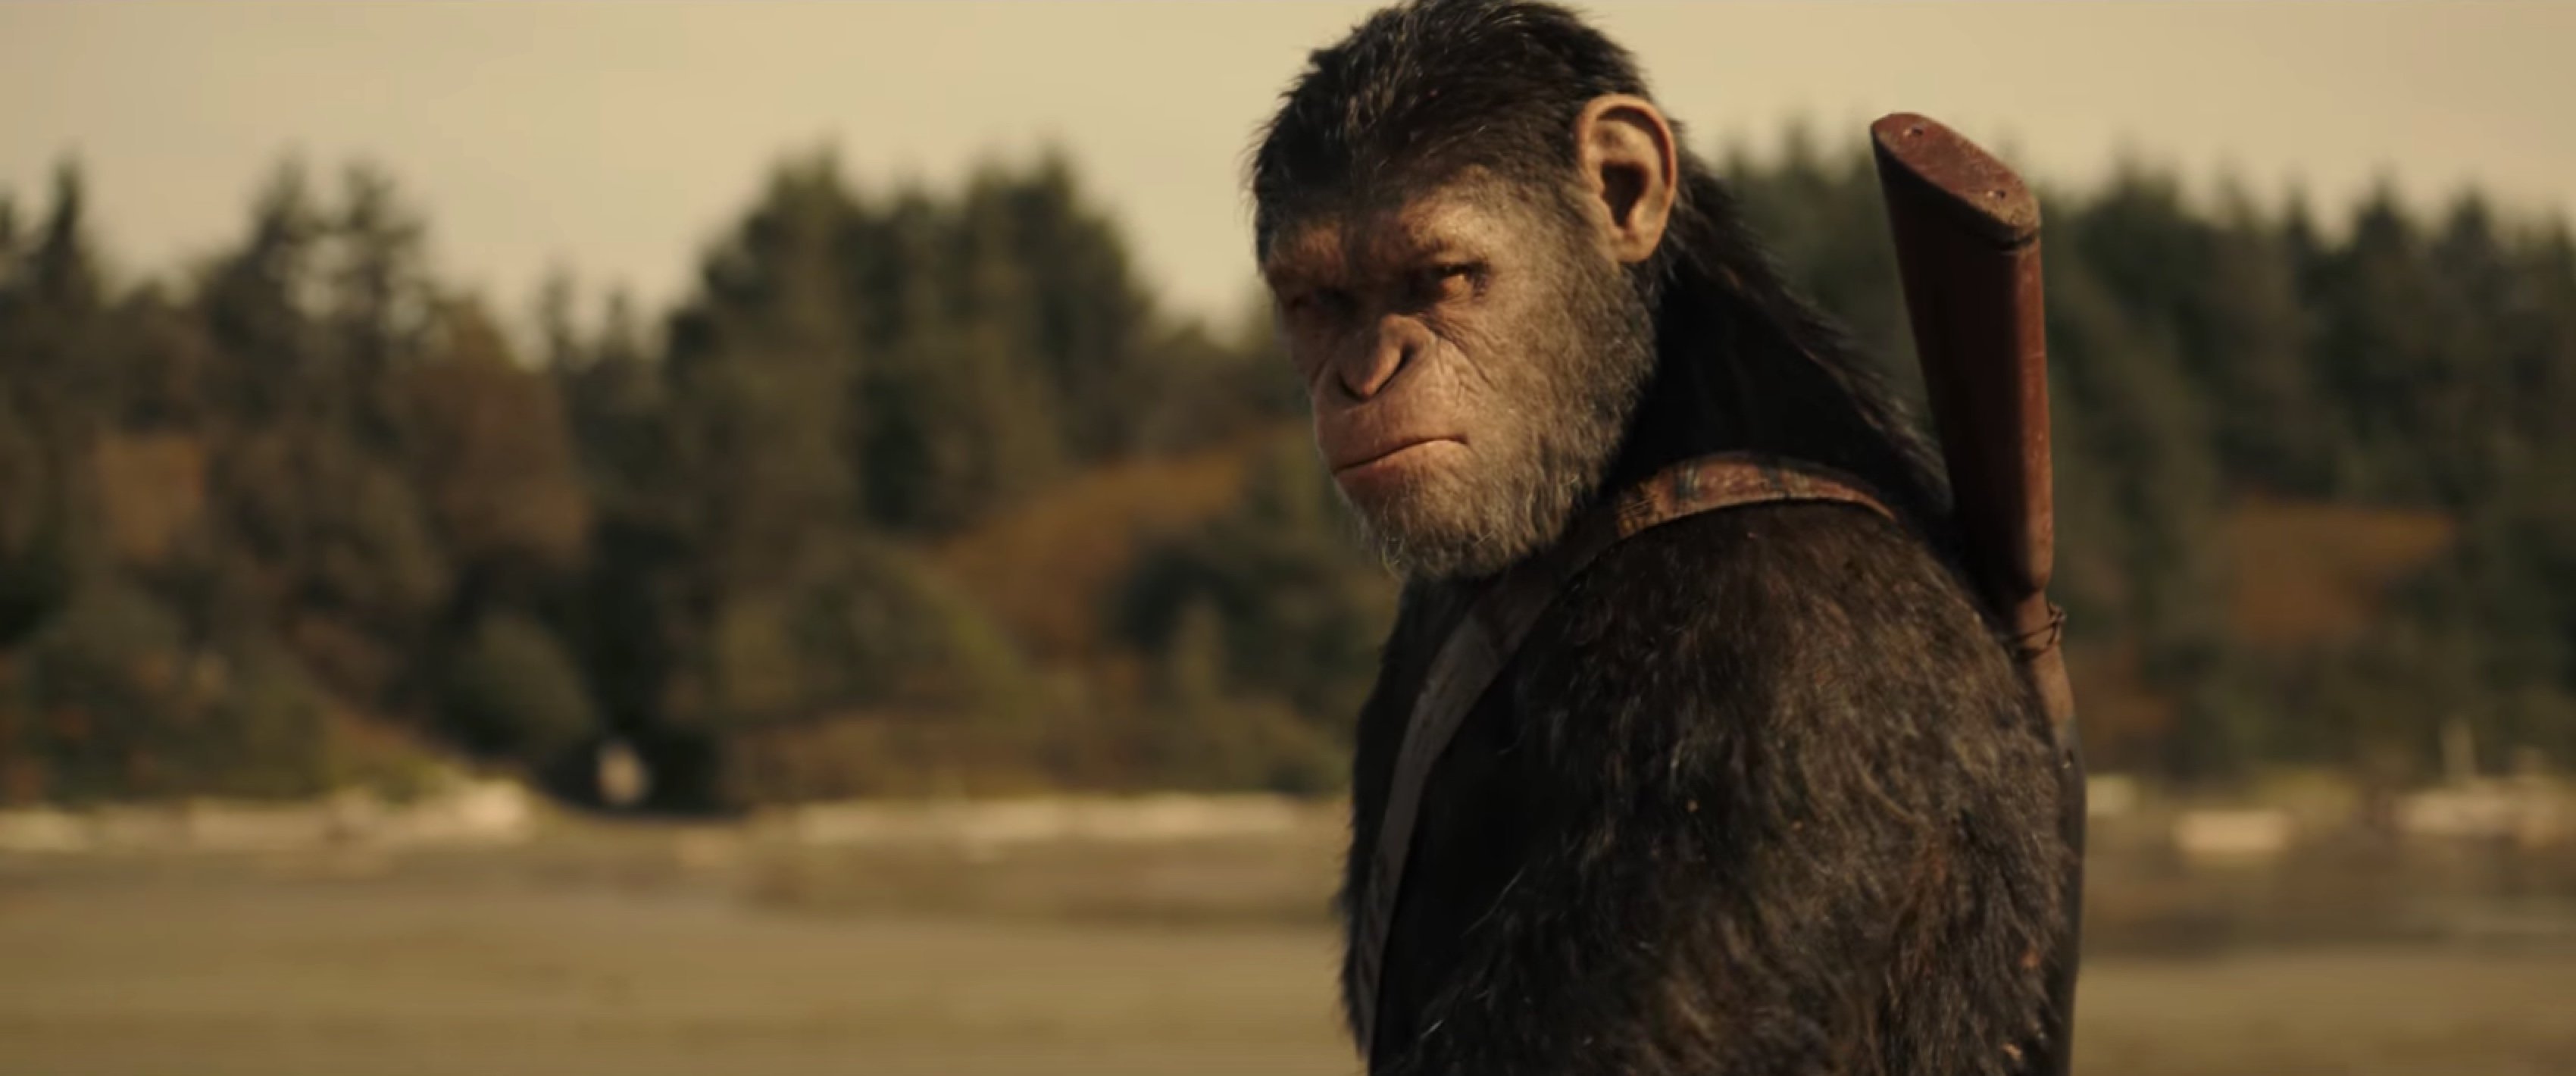 War for the Planet of the Apes | Mountain Xpress